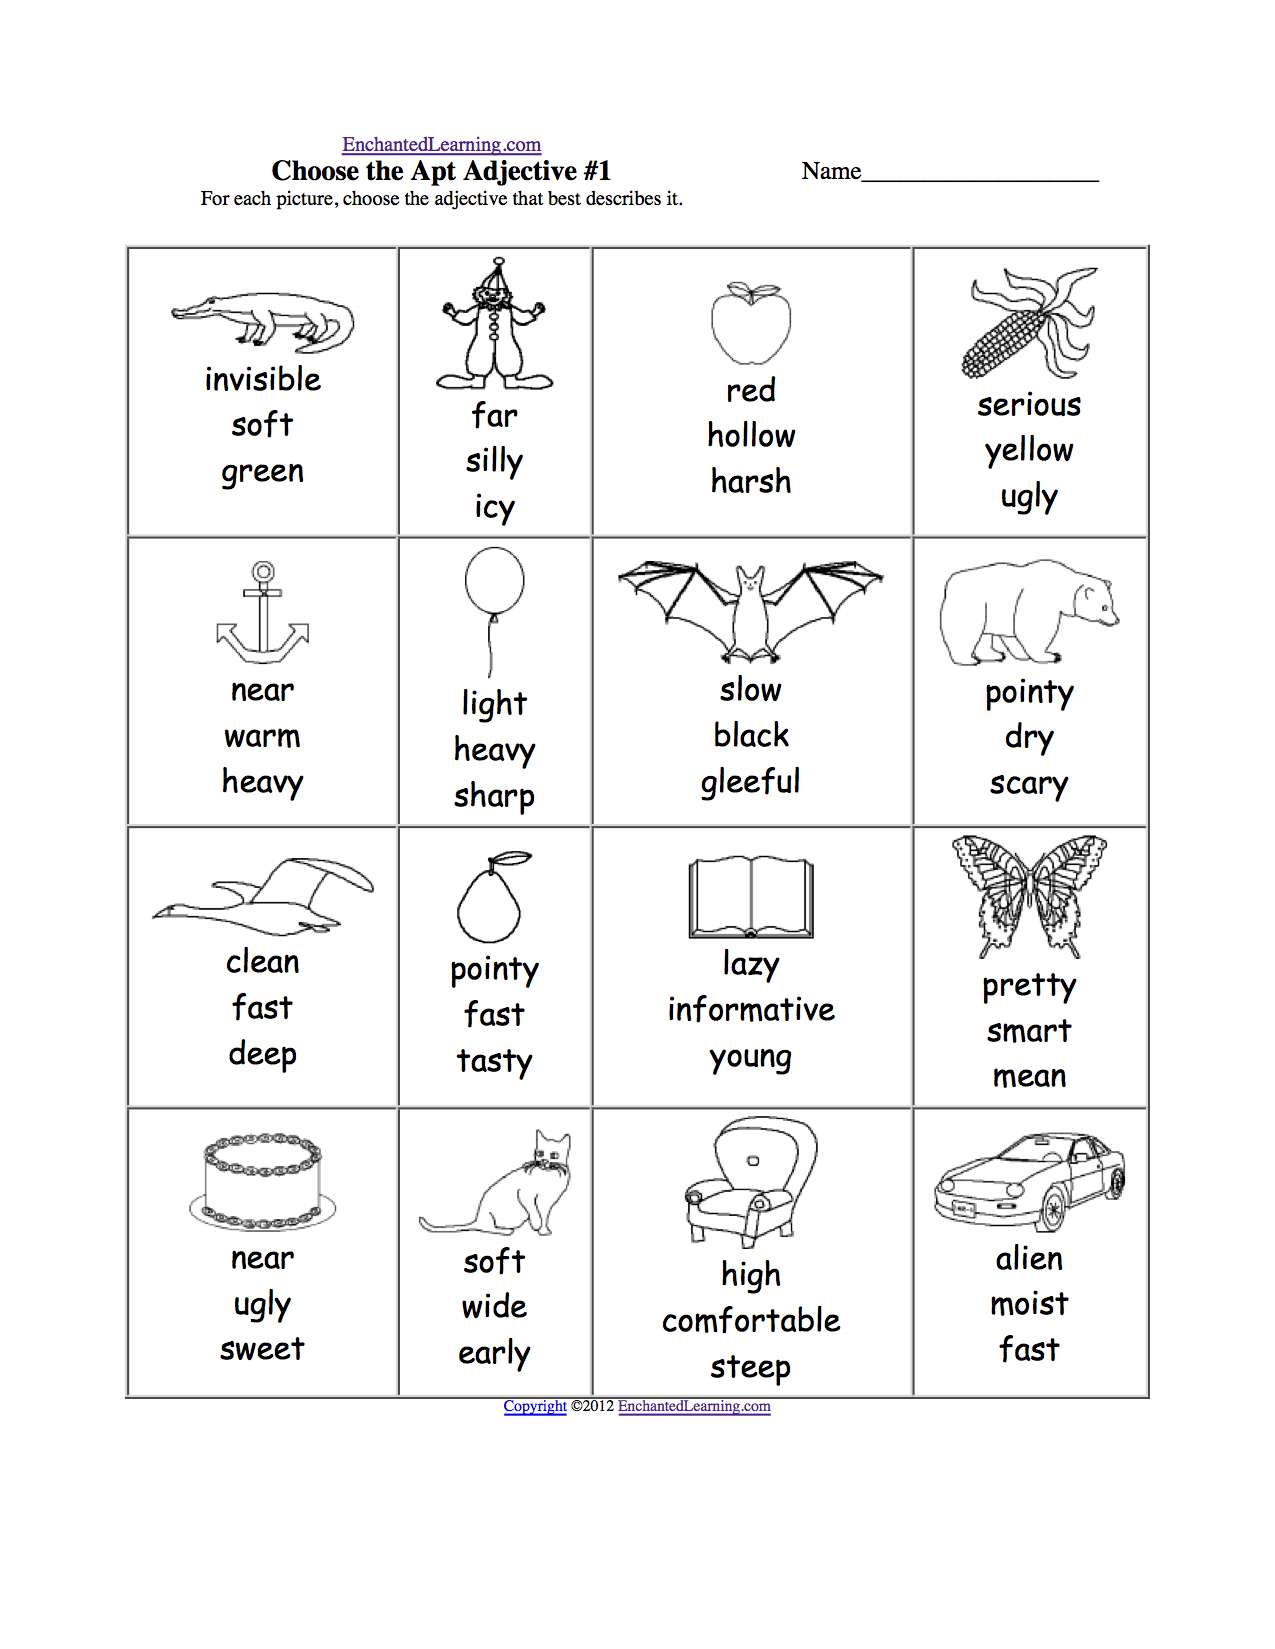 grade-6-grammar-lesson-15-adjectives-and-adverbs-comparison-grammar-lessons-adverbs